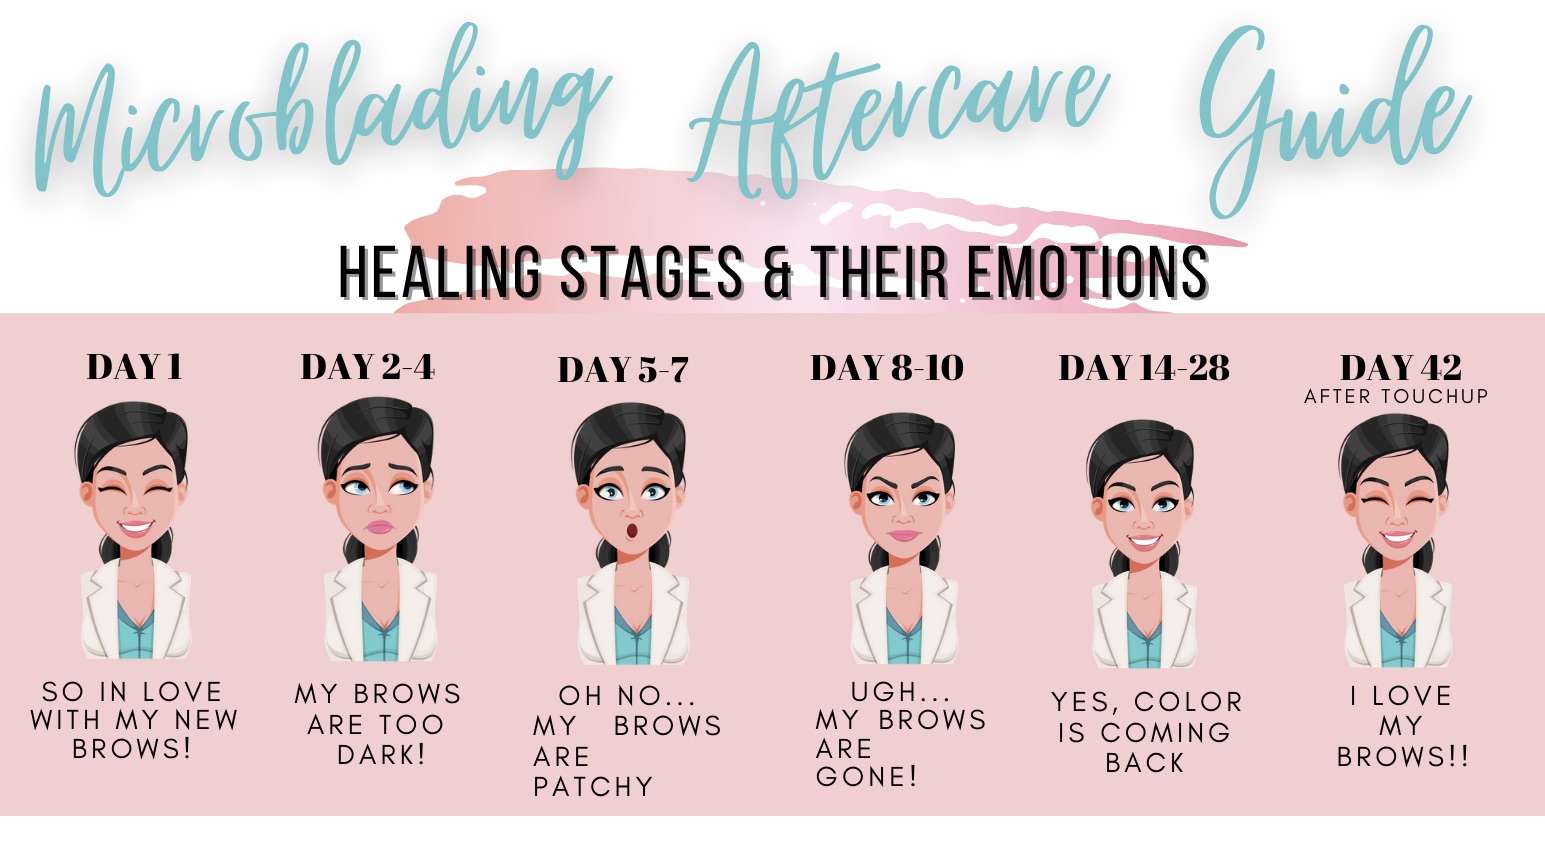 Microblading Aftercare Instructions at home care guide for the Microblading healing process day by day.